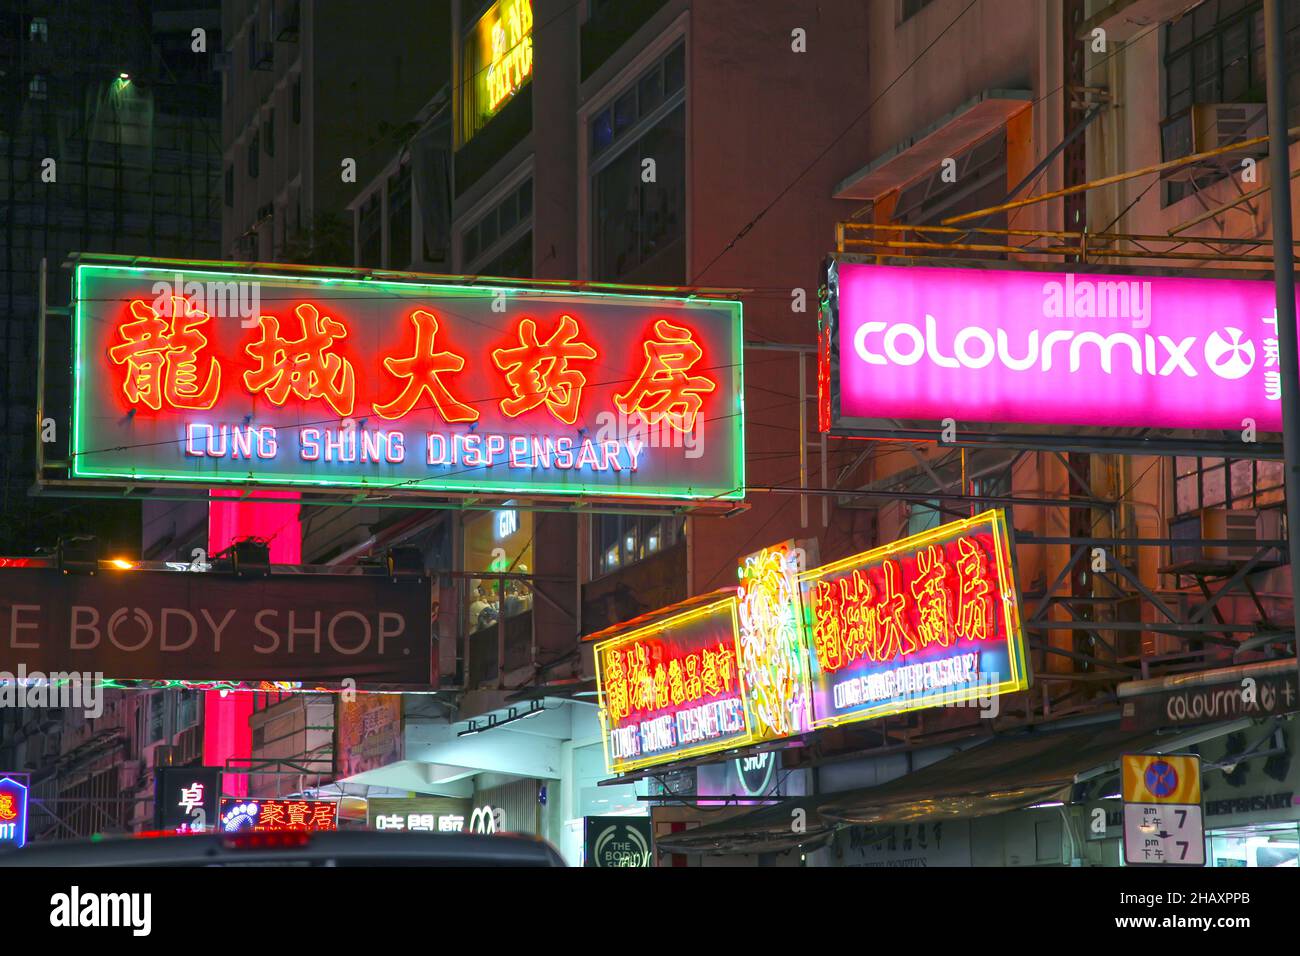 Neon signs at night in Hong Kong's Tsim Sha Tsui district in Kowloon with many signs written in Chinese characters. Stock Photo